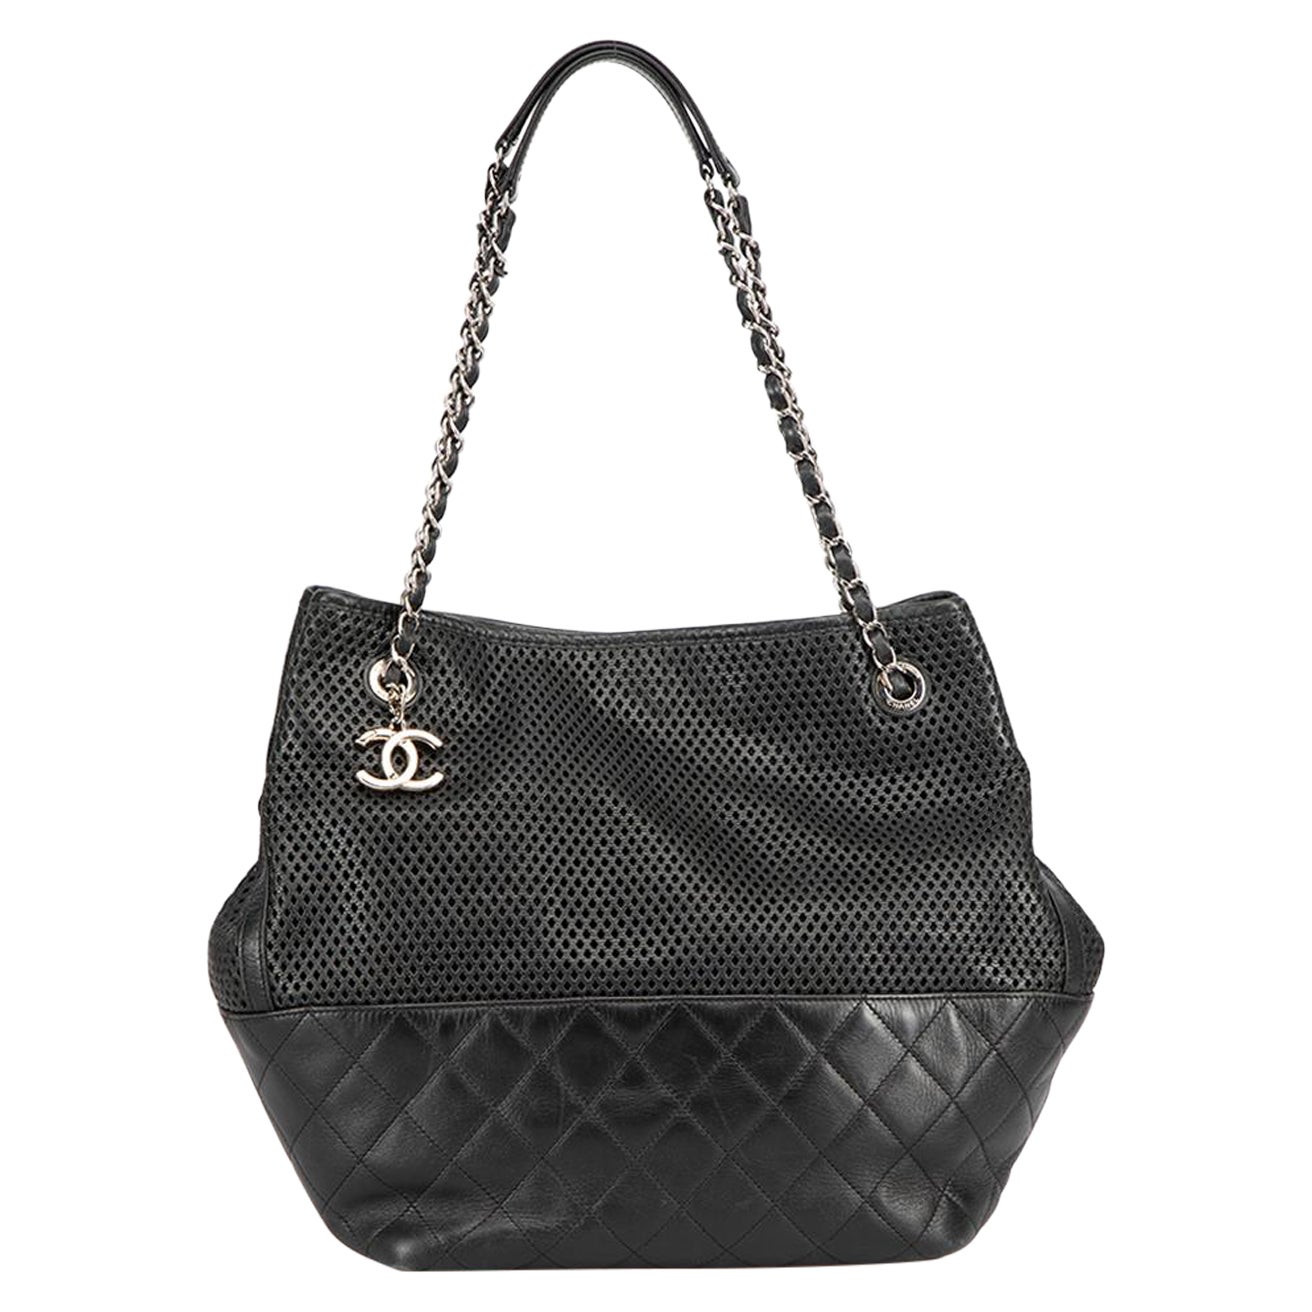 Chanel Women's Black Leather CC Up In The Air Tote For Sale